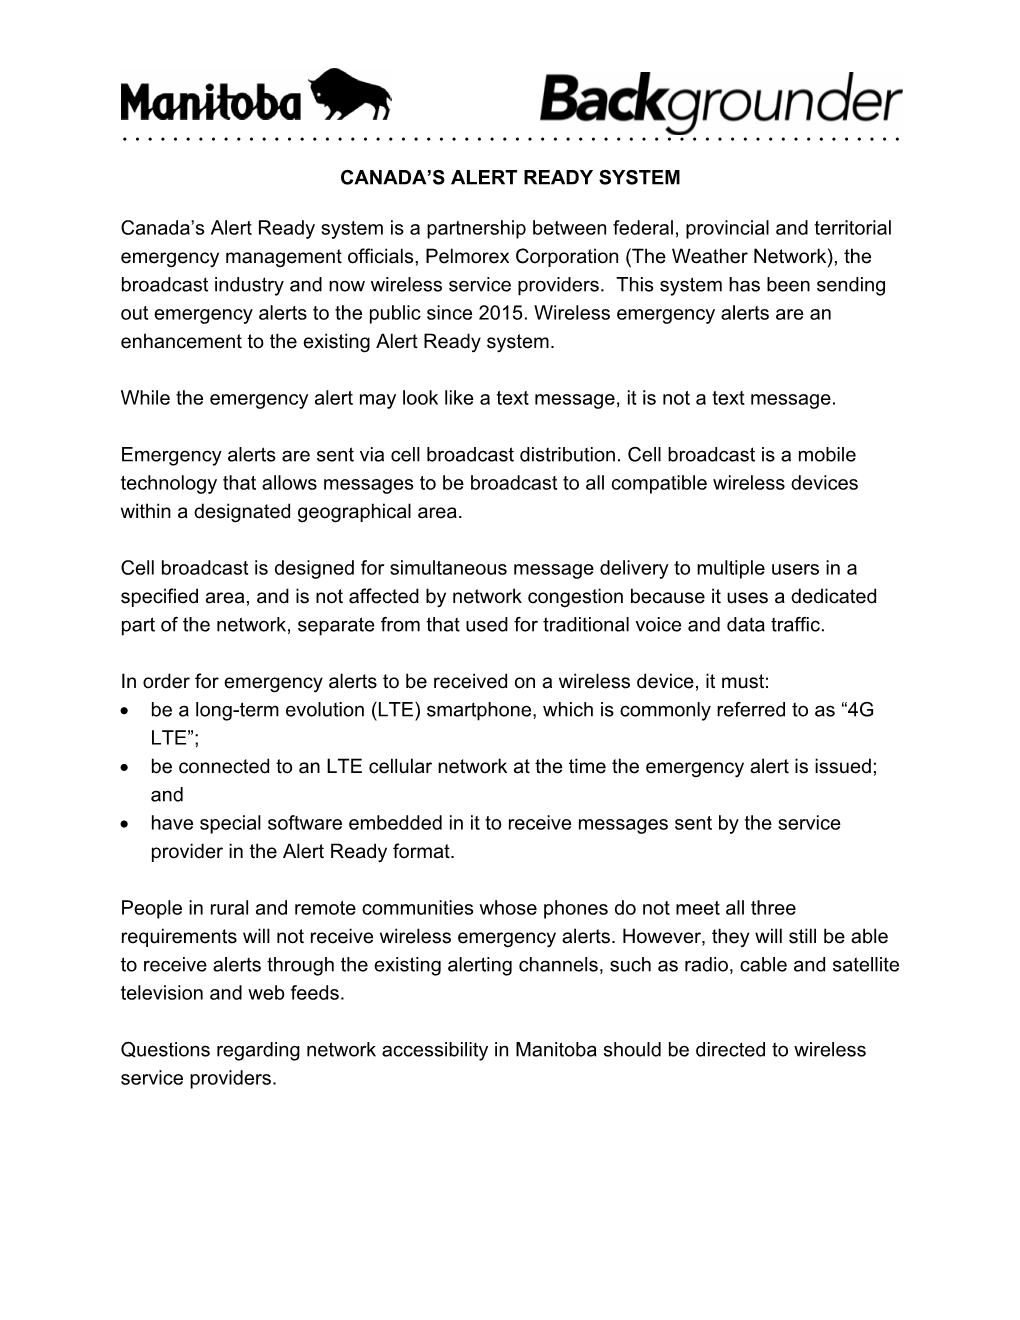 CANADA's ALERT READY SYSTEM Canada's Alert Ready System Is a Partnership Between Federal, Provincial and Territorial Emergen